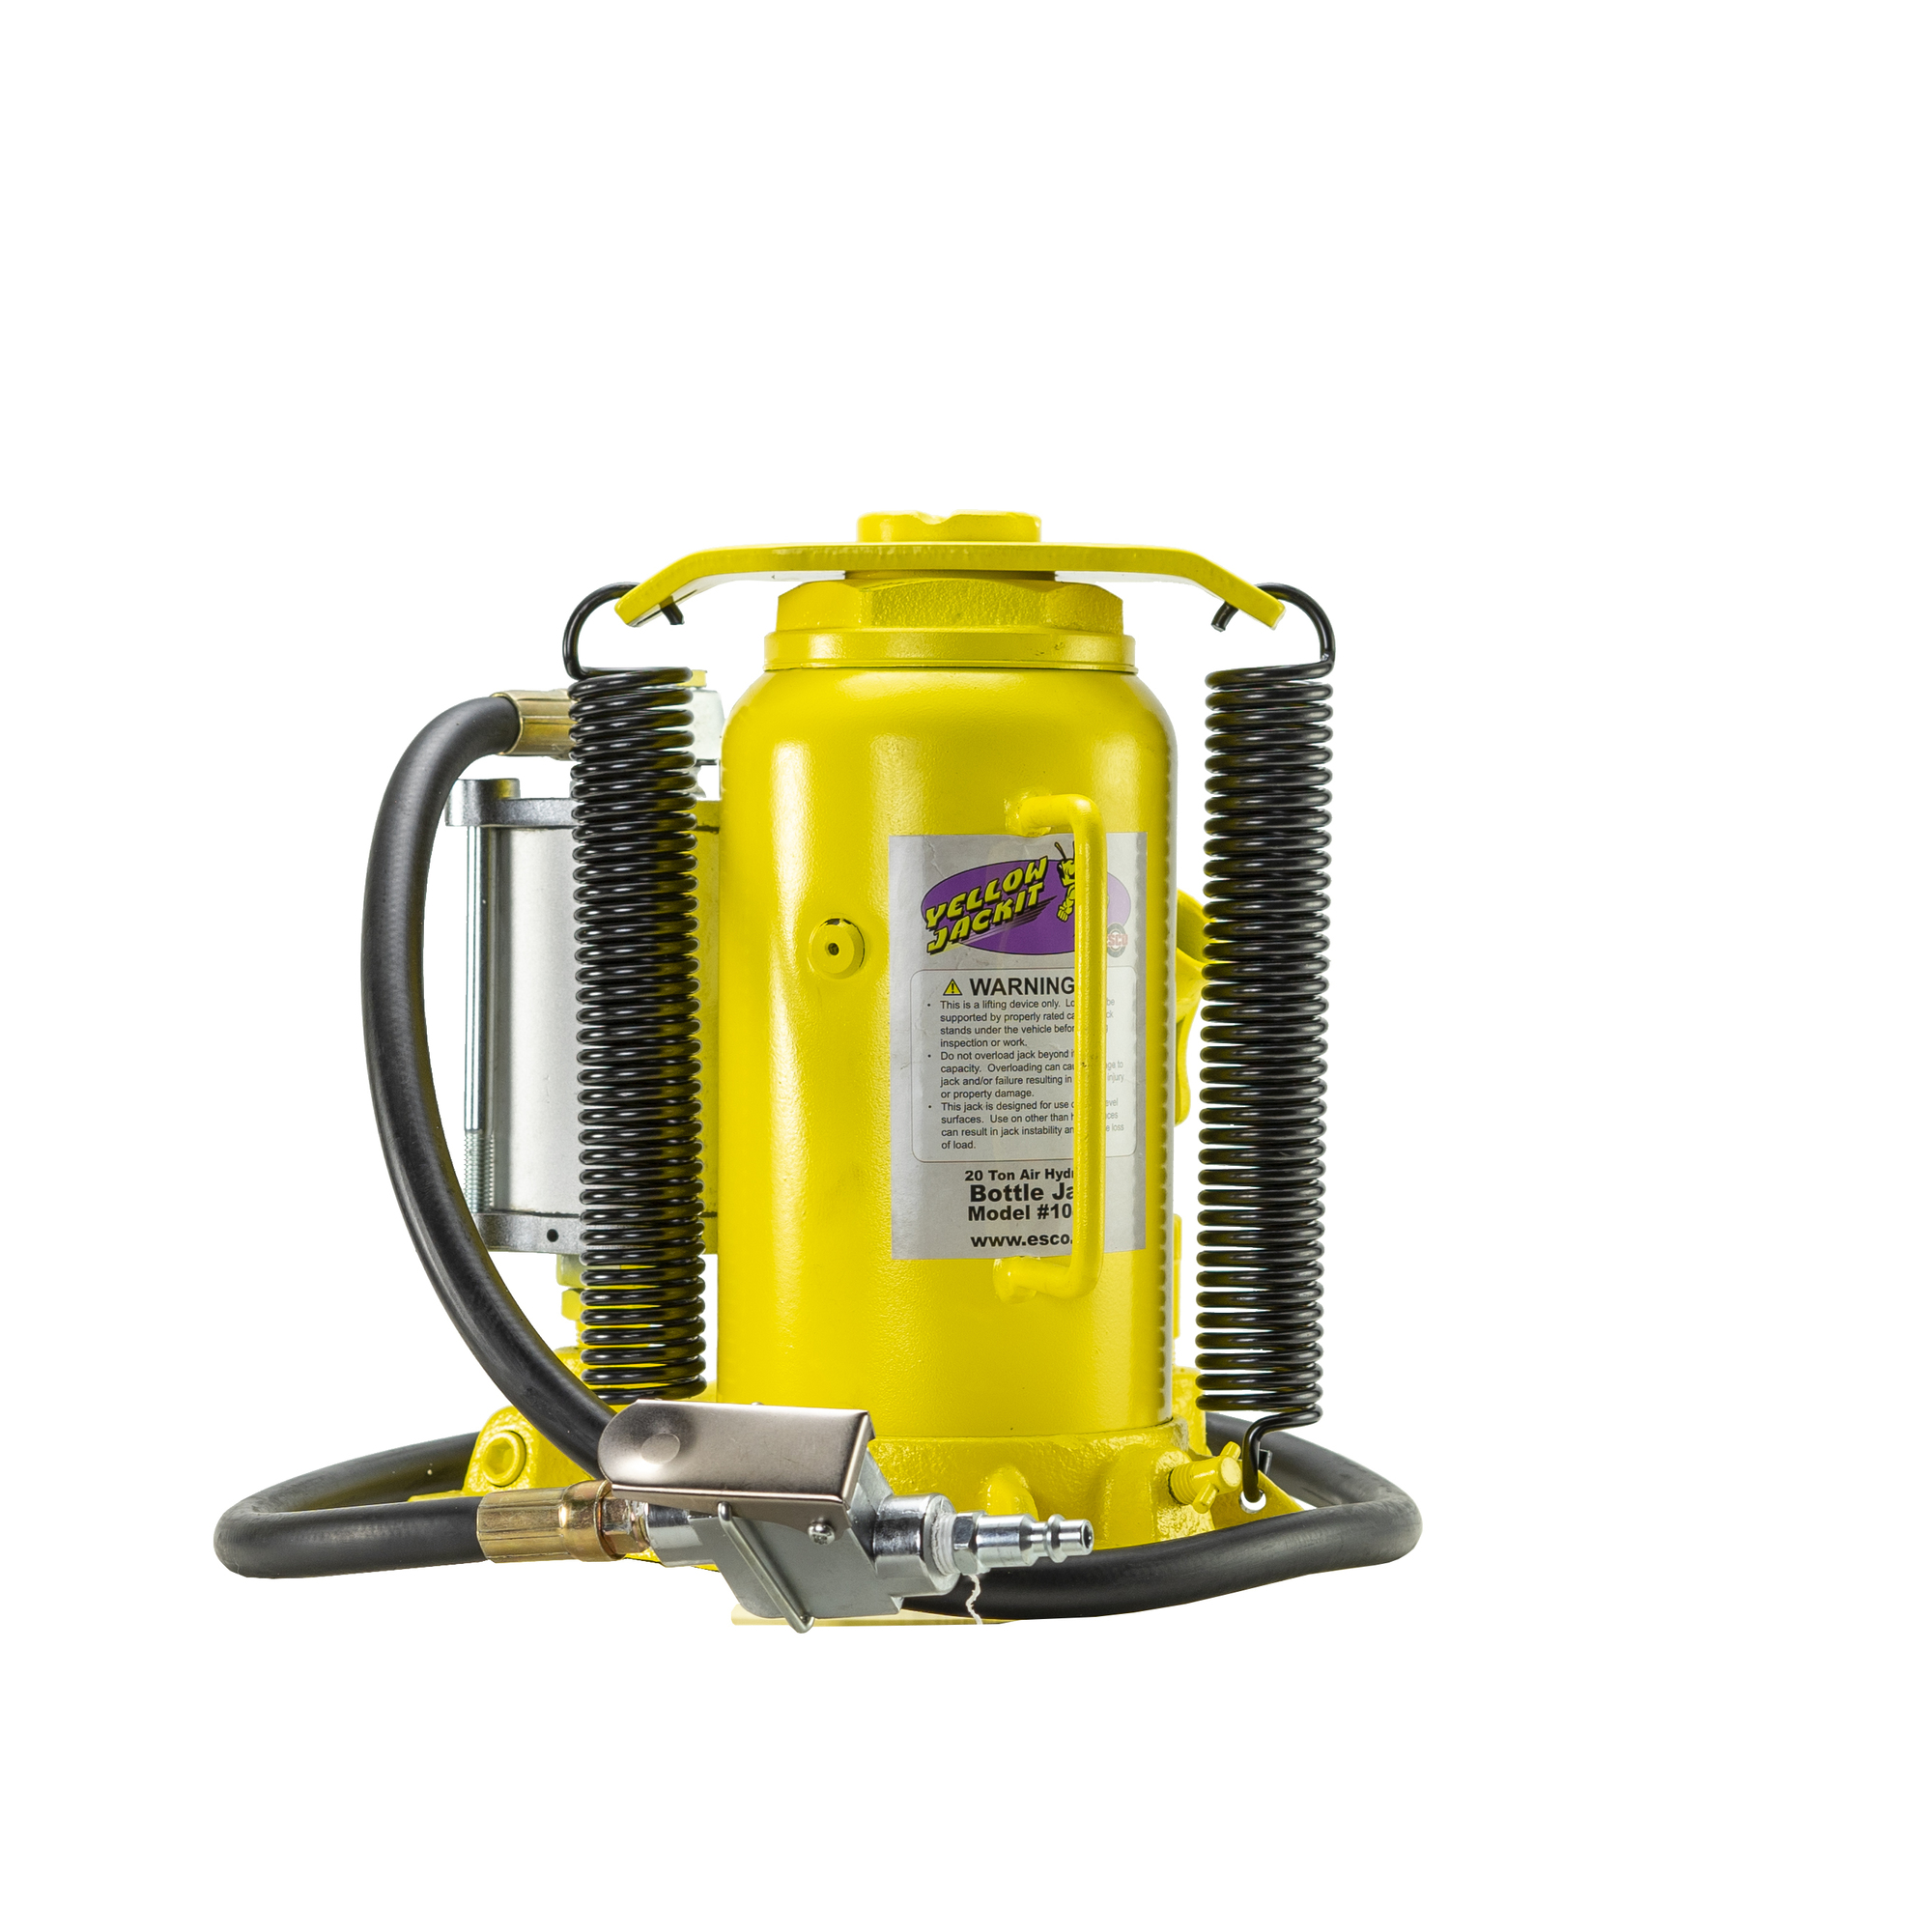 ESCO Yellow Jackit, 20 Ton Series Air/Hydr Bottle jack, Lift Capacity 20 Tons, Max. Lift Height 19.2 in, MInch Lift Height 10.3 in, Model 10450